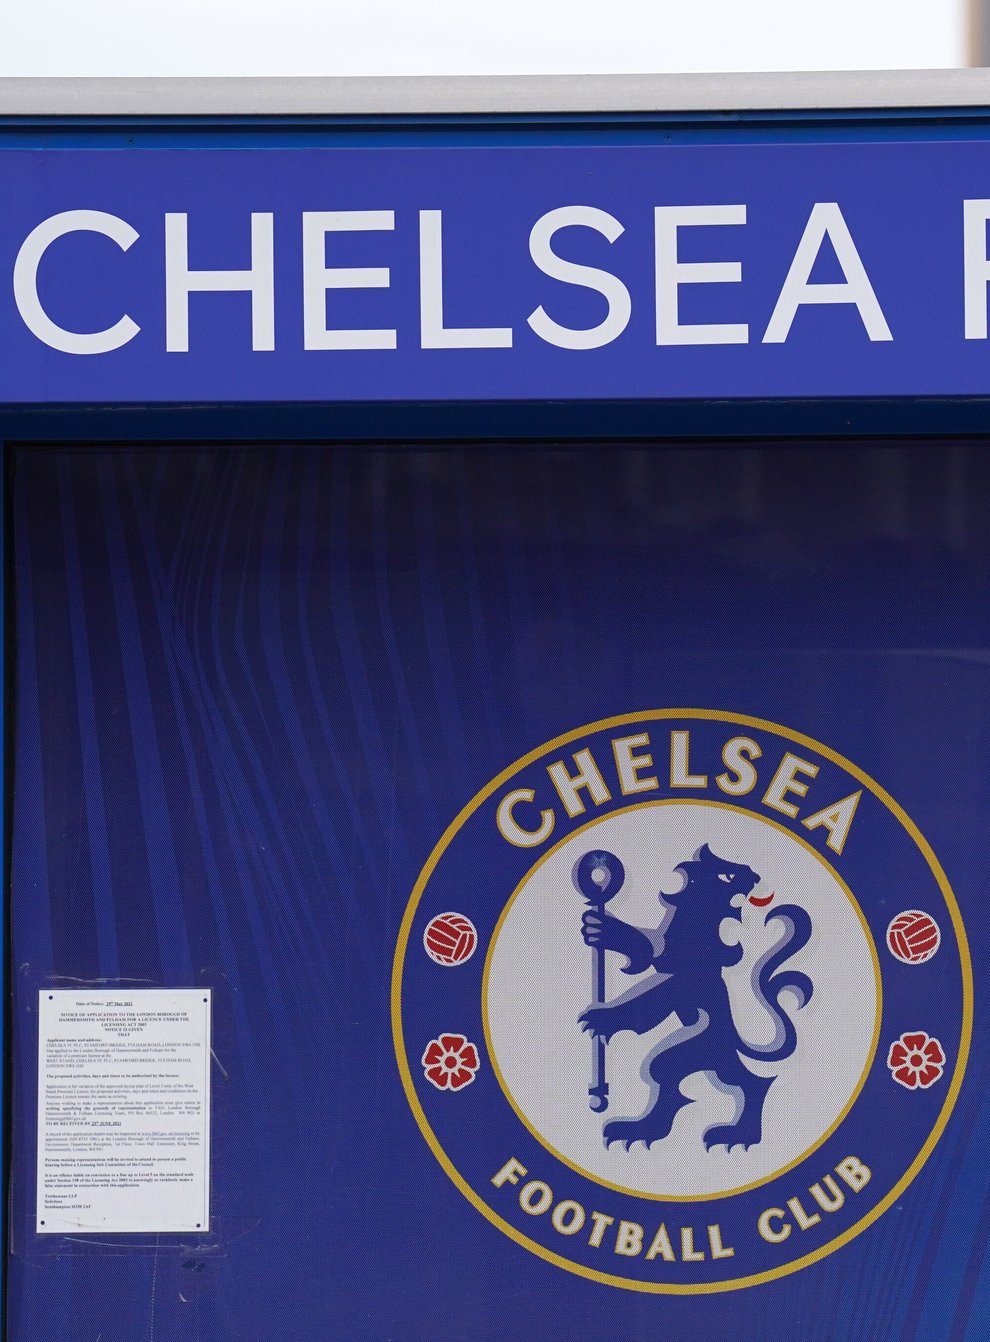 A programme stall outside Stamford Bridge, home of Chelsea FC (PA)